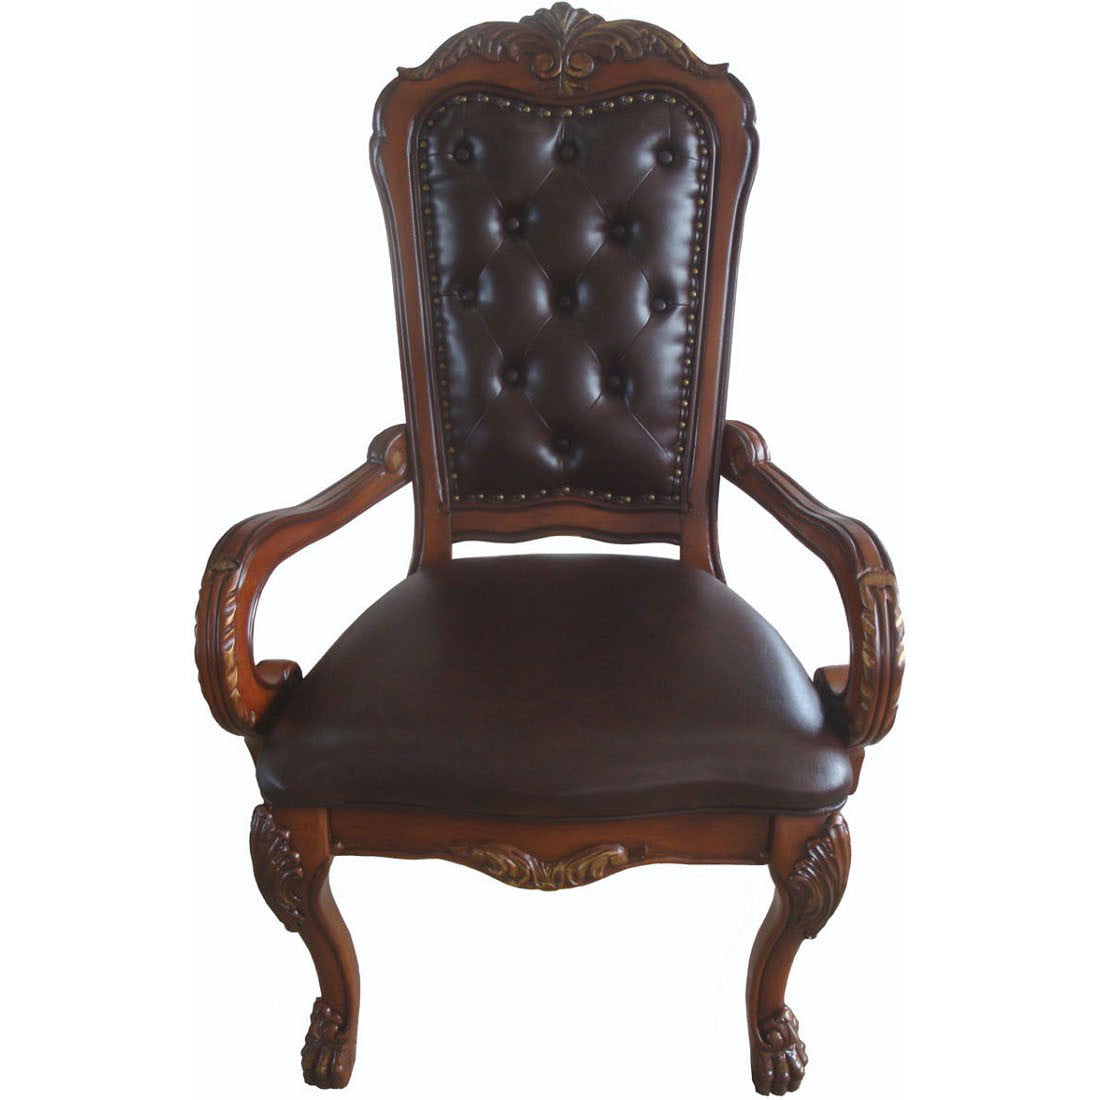 Traditional Antique Solid Carved Wood Upholstery Office Arm Chair W